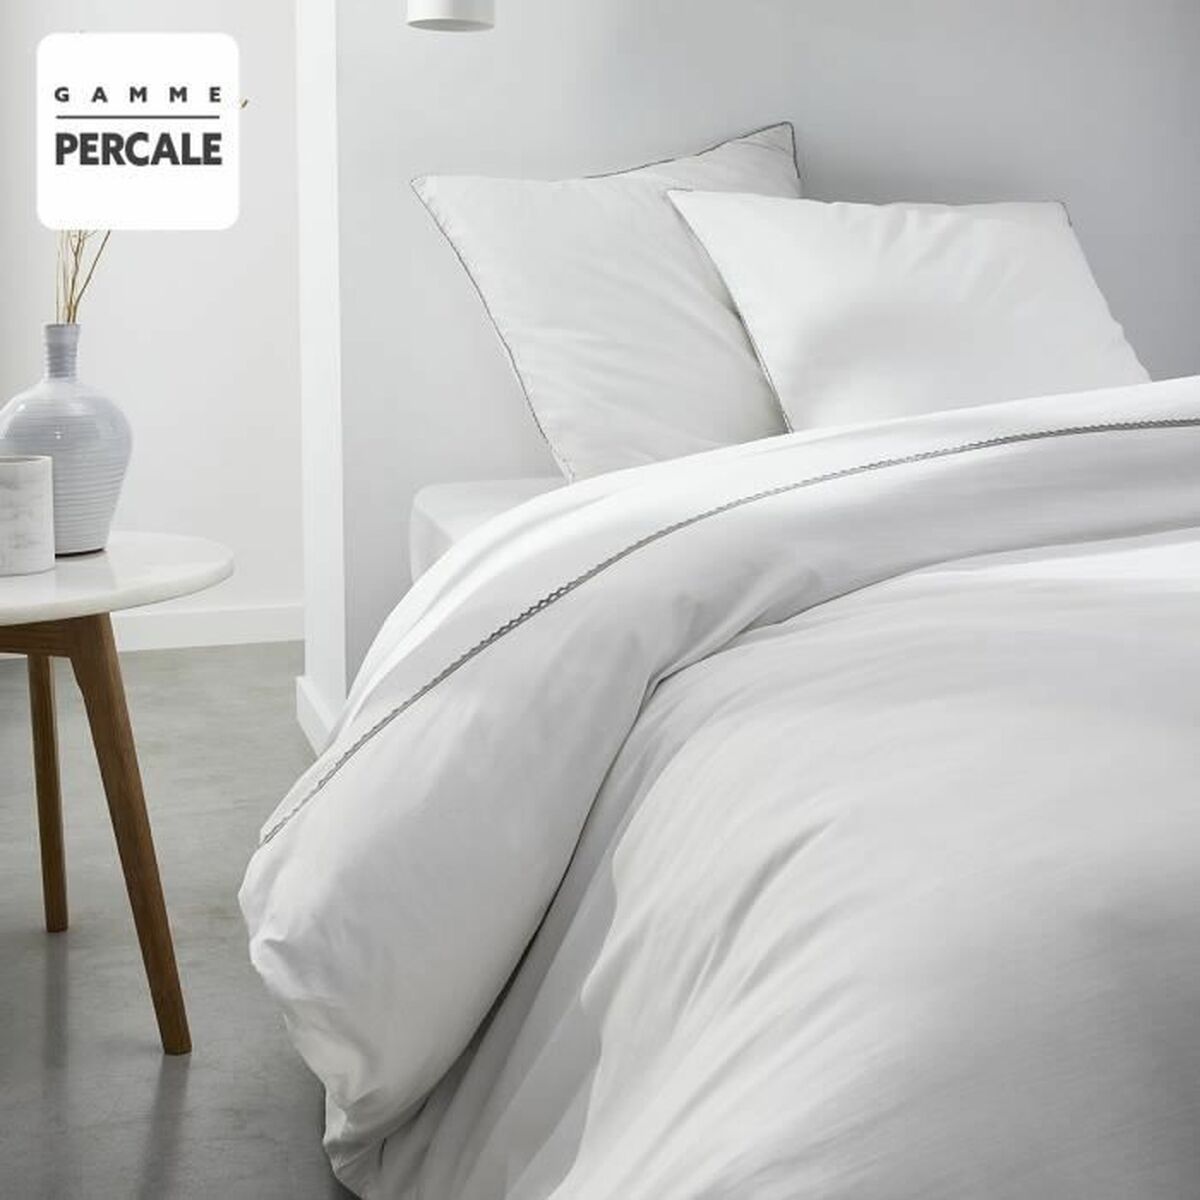 Nordic cover TODAY Percale White Macrame 240 x 260 cm